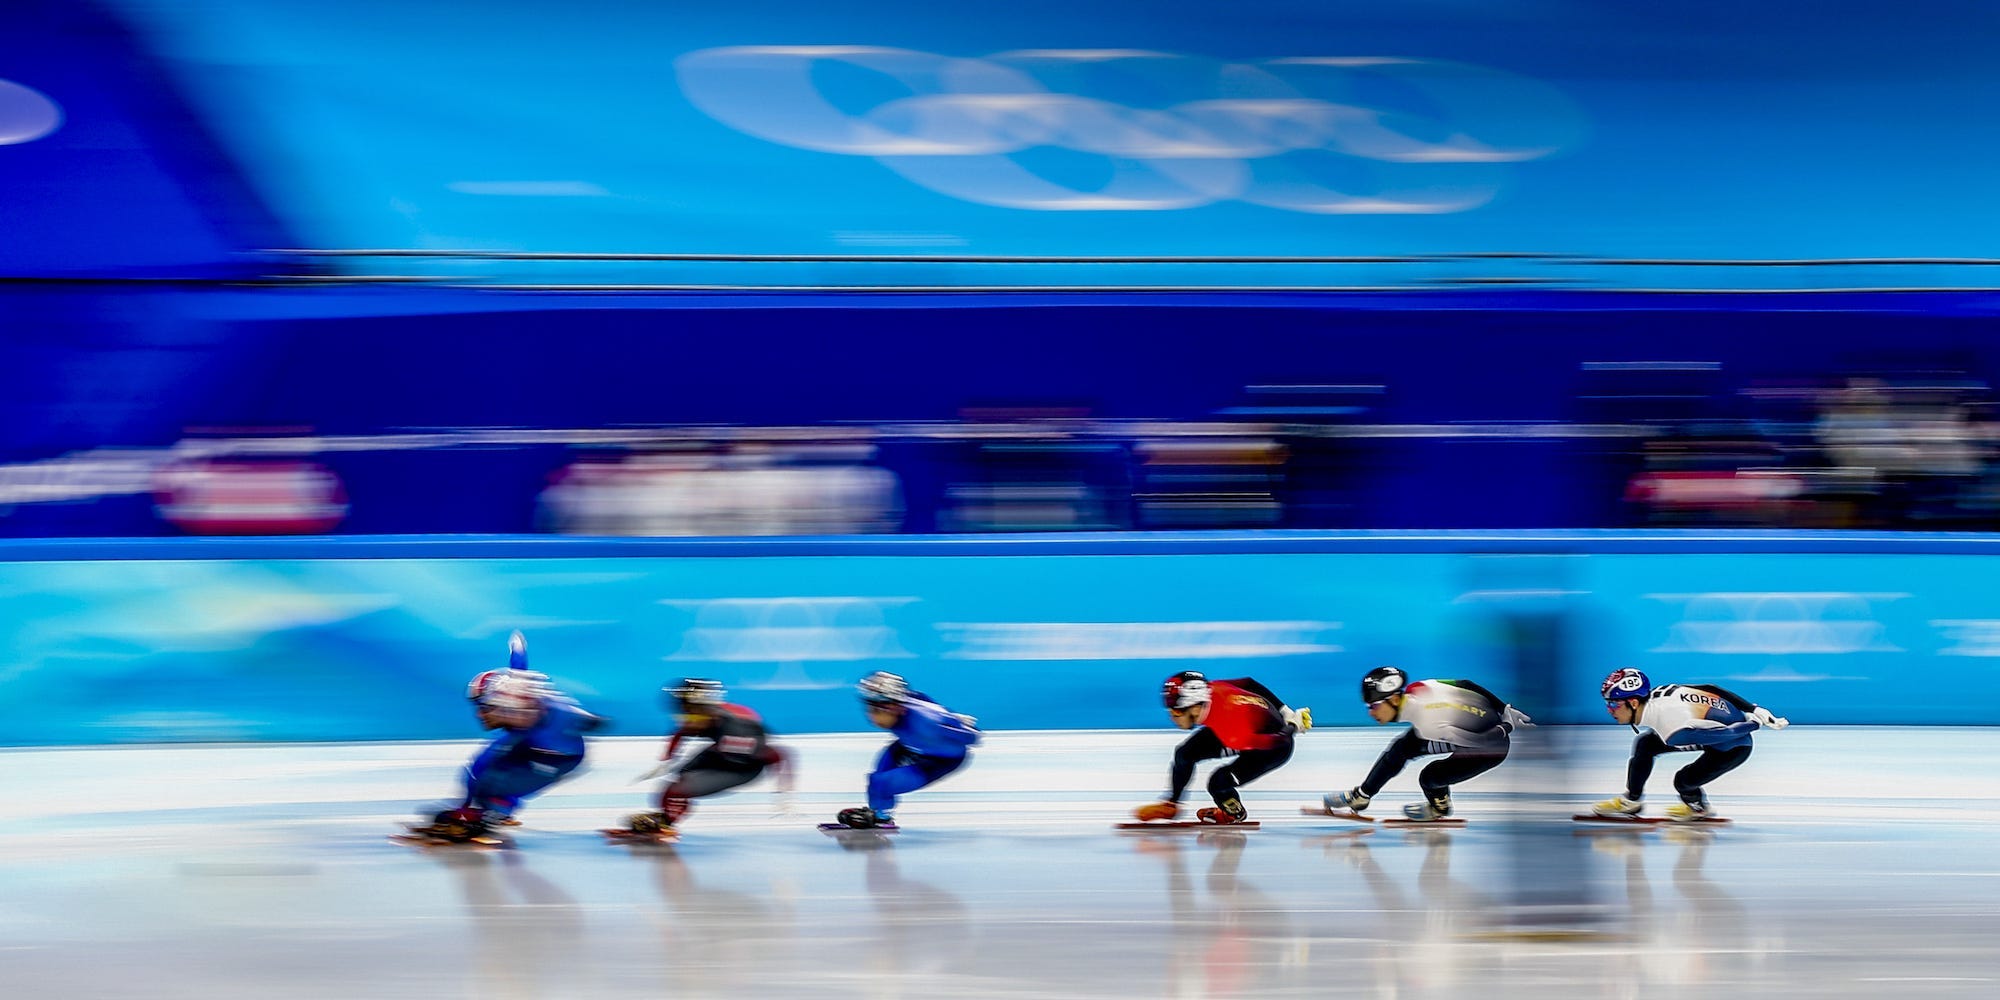 Speed skaters compete in the Olympics.